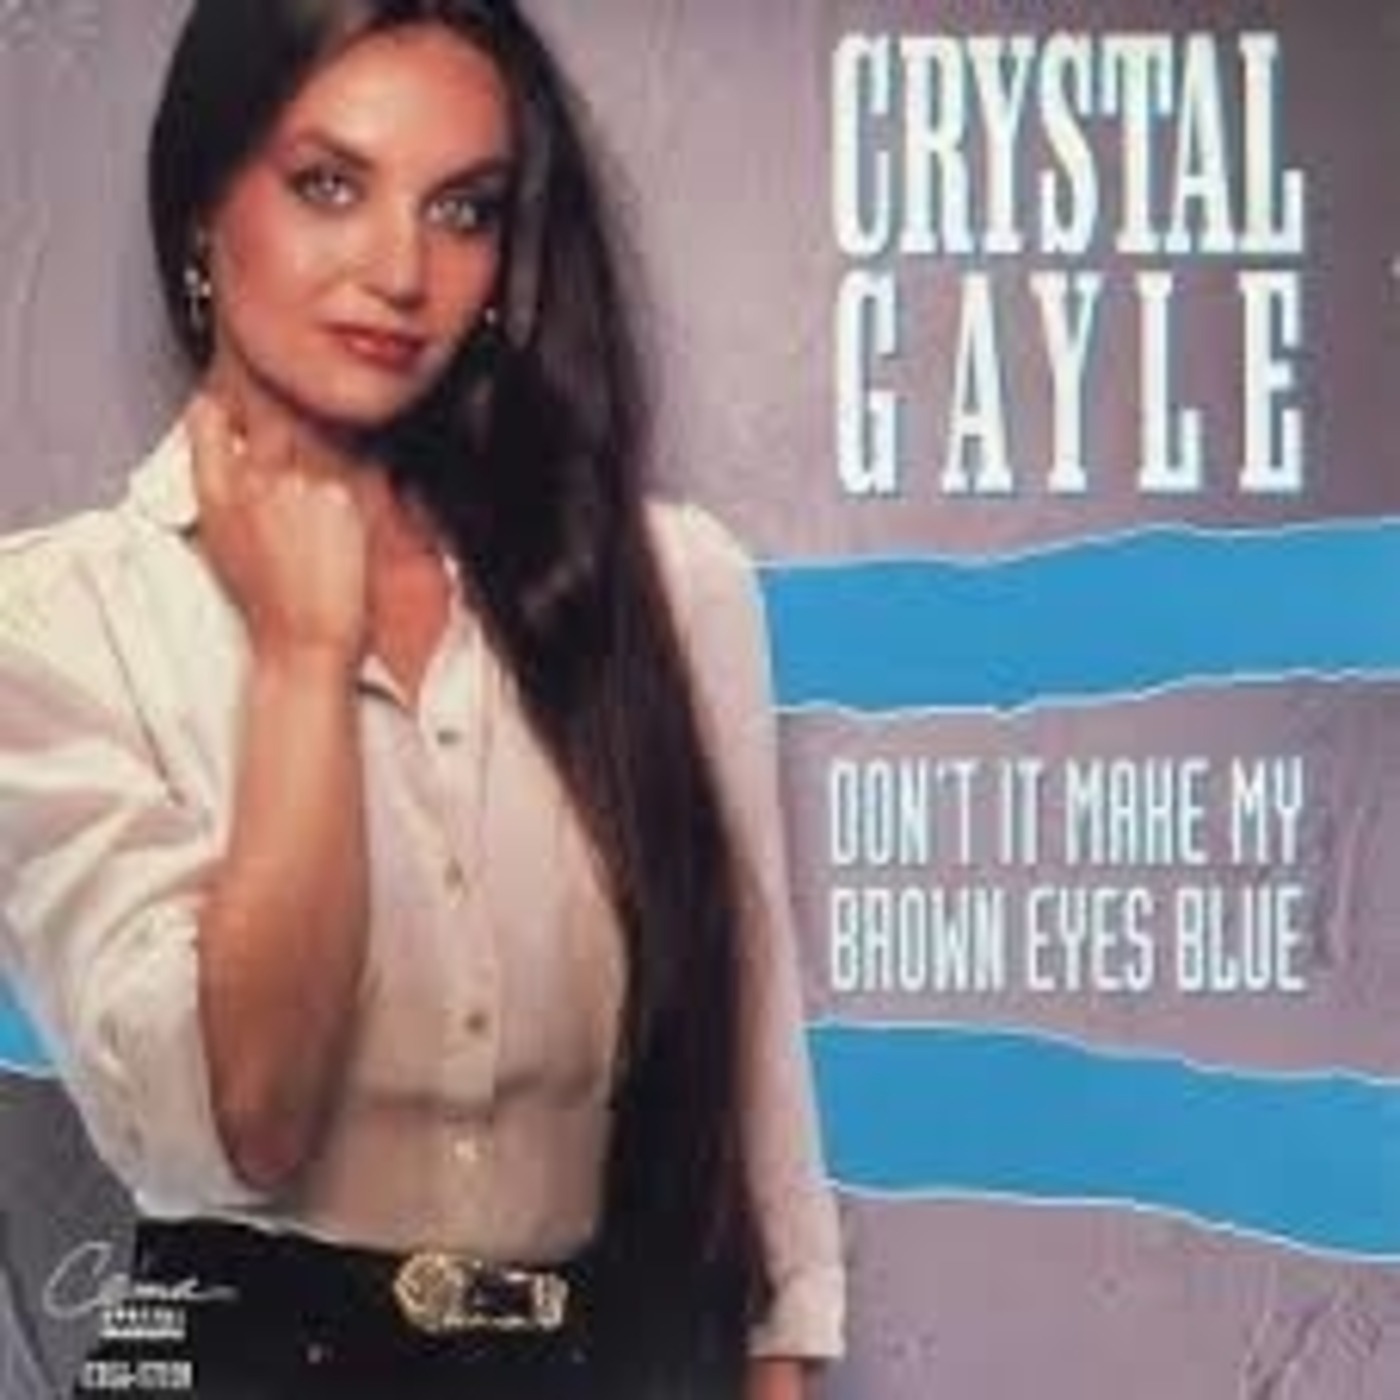 Don't It Make My Brown Eyes Blue by Crystal Gayle